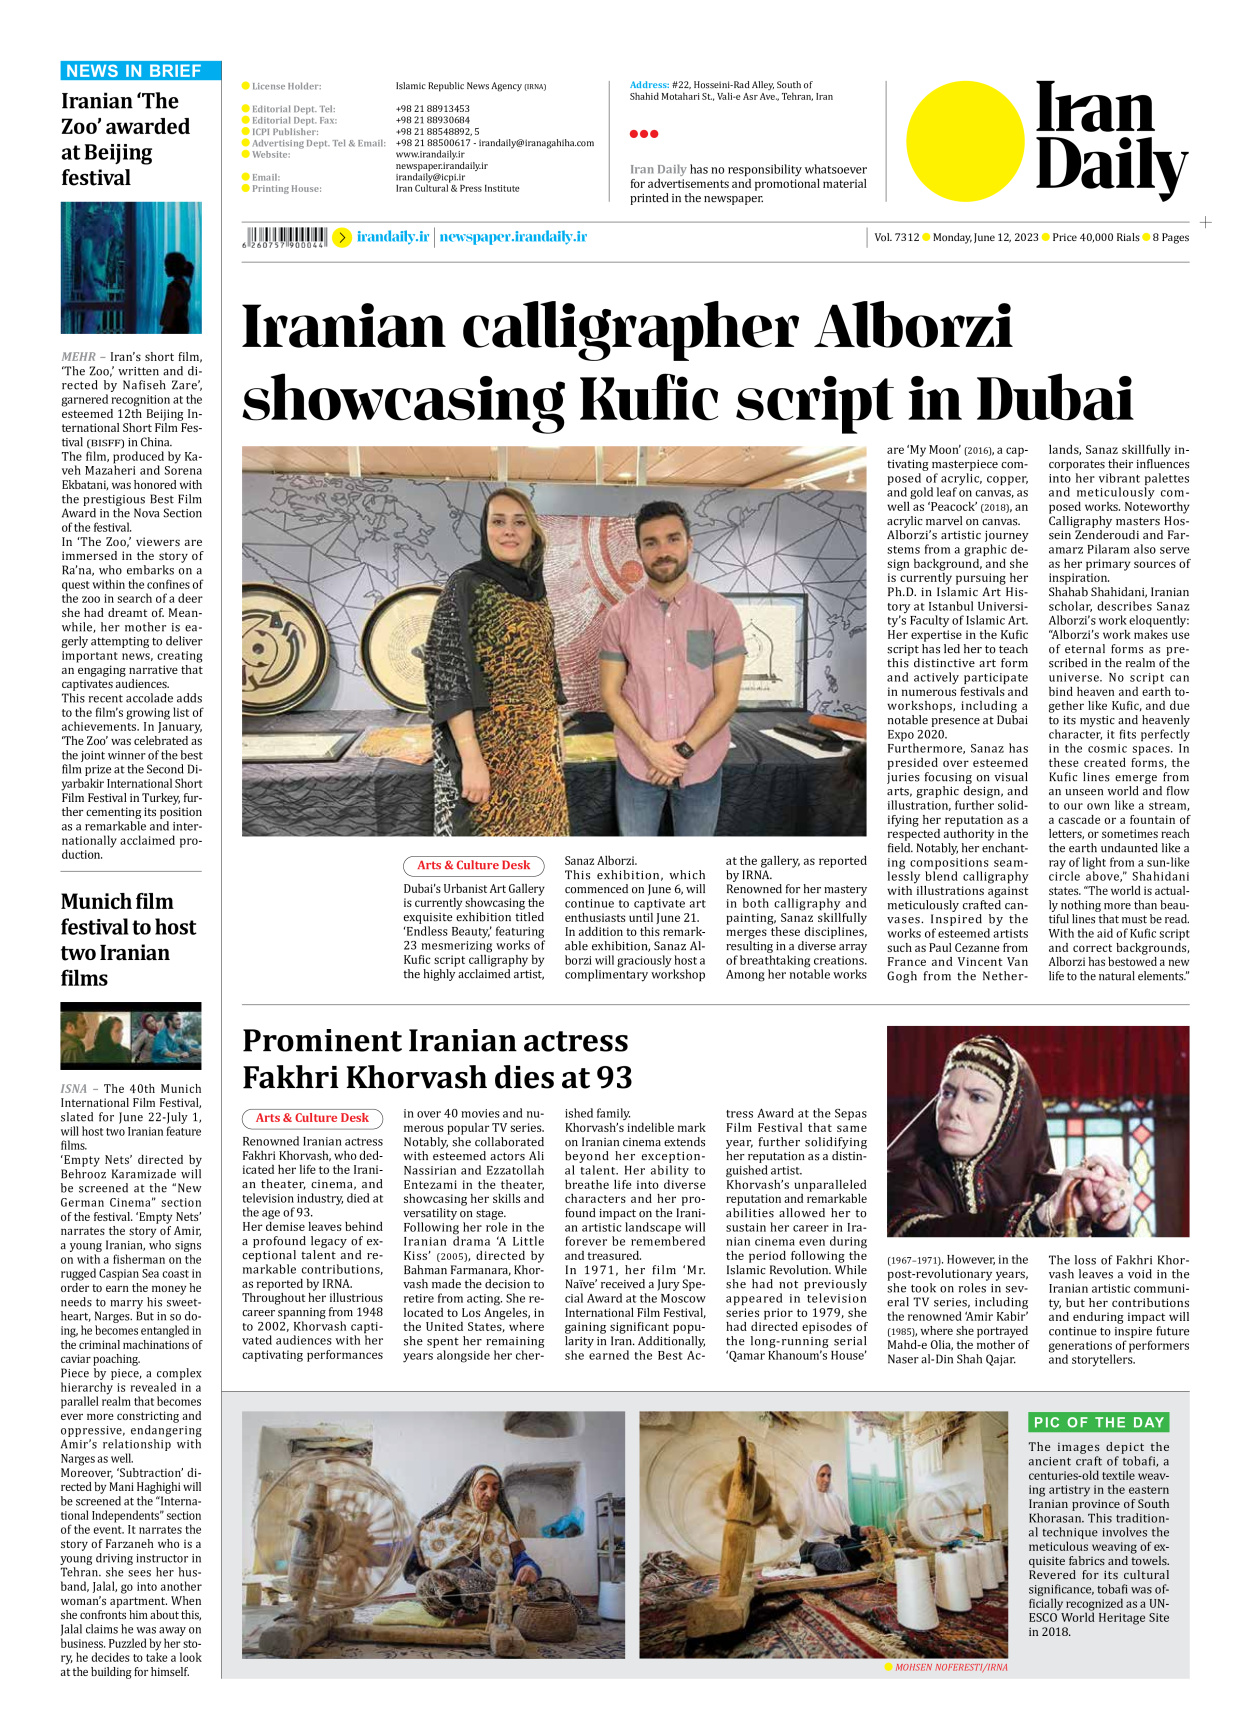 Iran Daily - Number Seven Thousand Three Hundred and Twelve - 12 June 2023 - Page 8